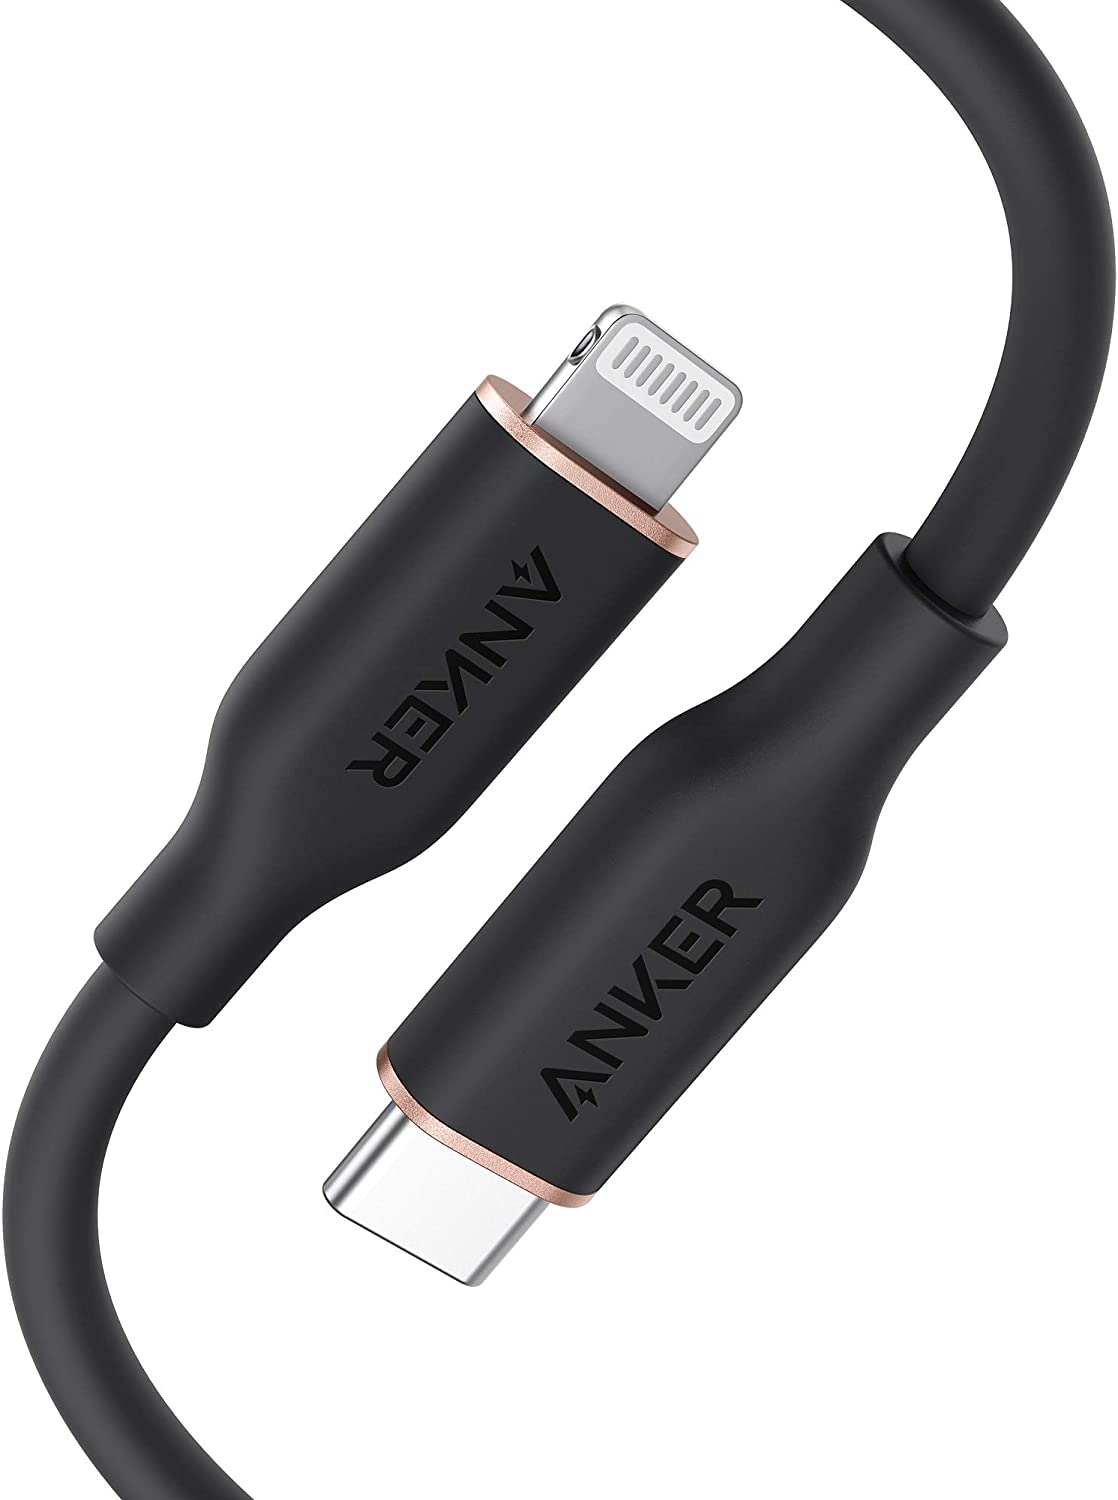 Anker Powerline Iii Flow USB-C To Lightning Cable 0.9M – Black